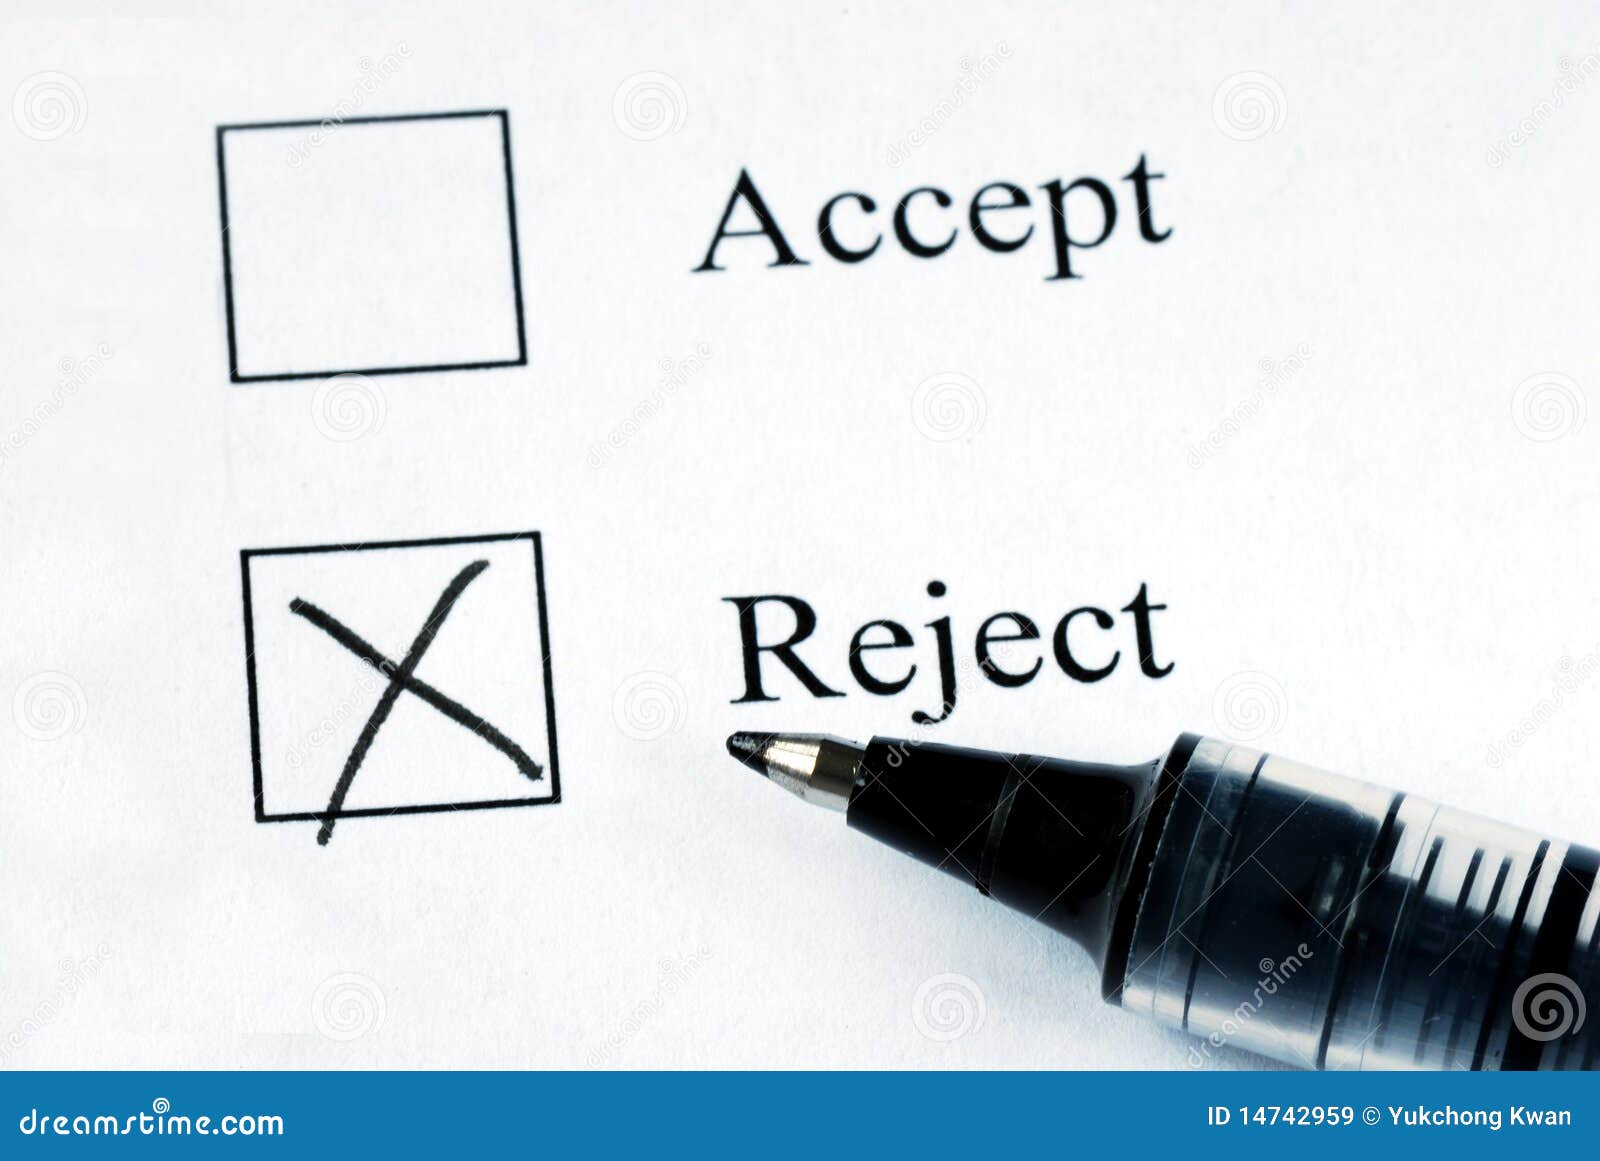 select the reject option